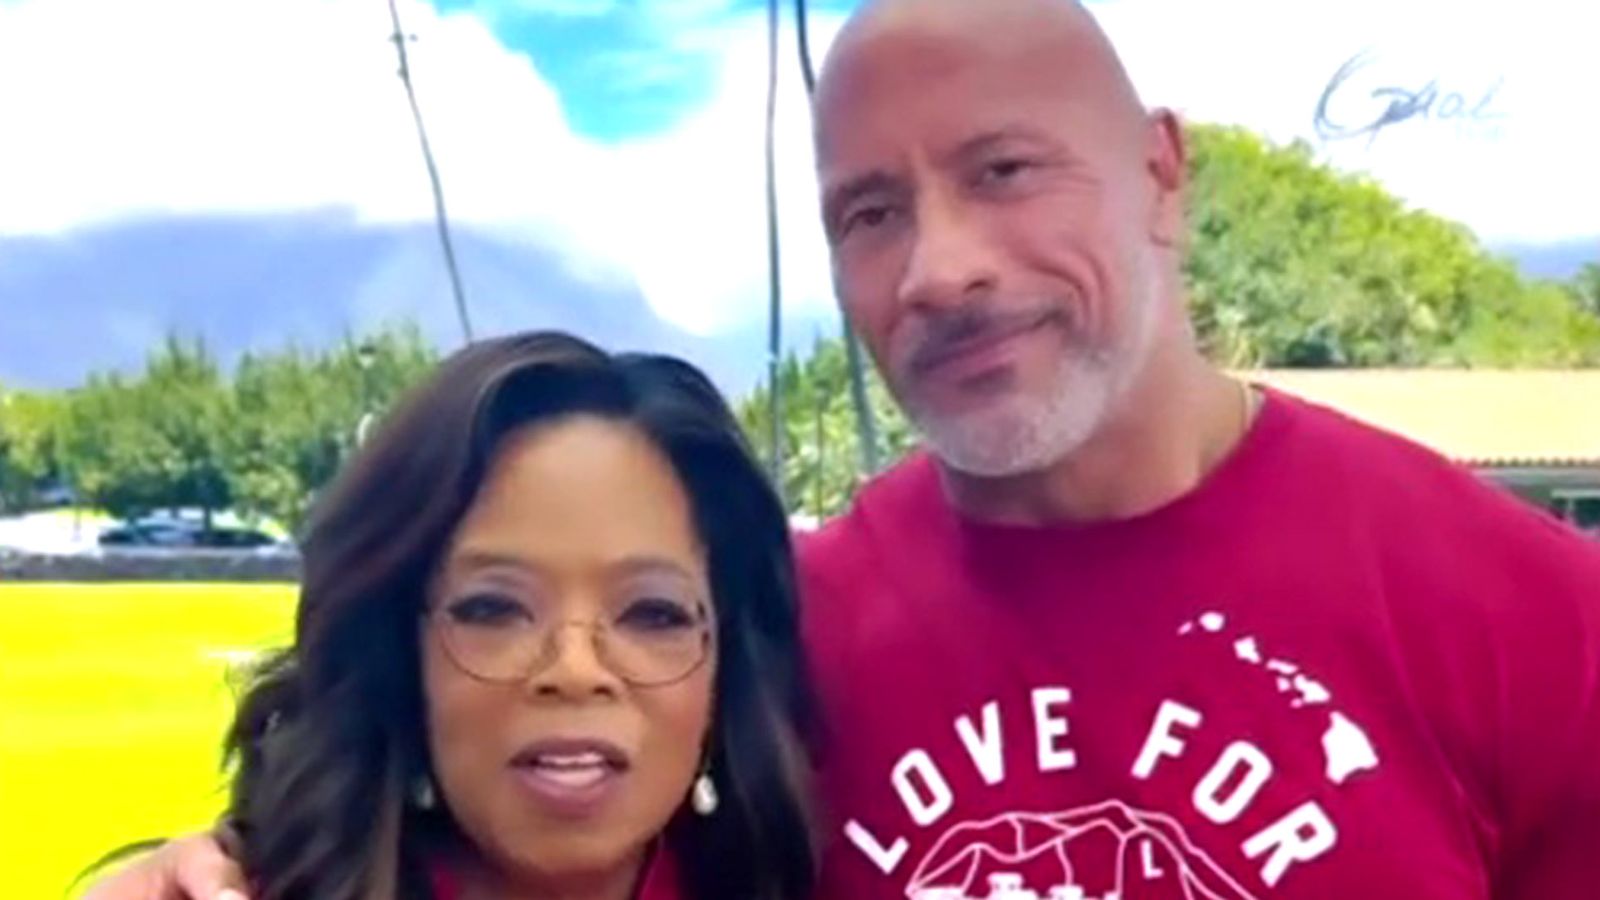 Oprah is stuck between a ROCK and a hard place after this Maui donatio